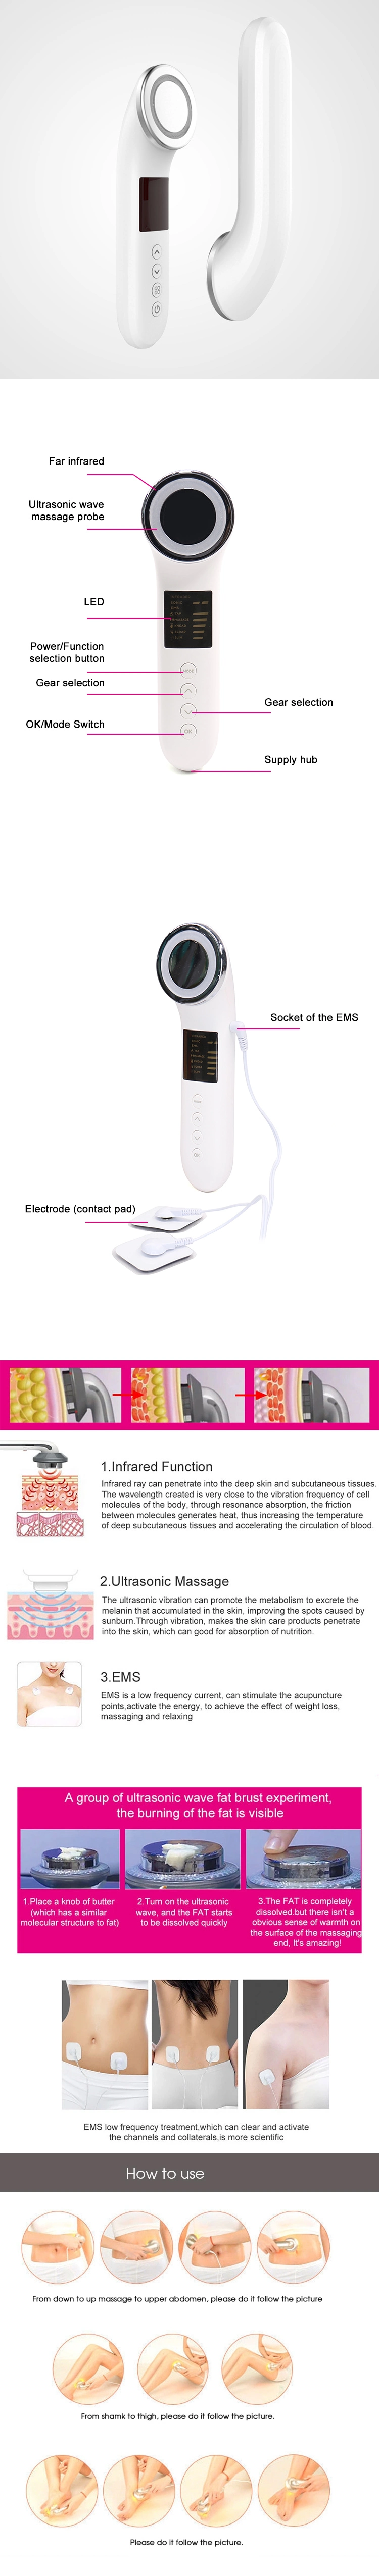 LED Light Therapy Facial Massager, Light Therapy Device for Acne, Vibration Skin Firming Care